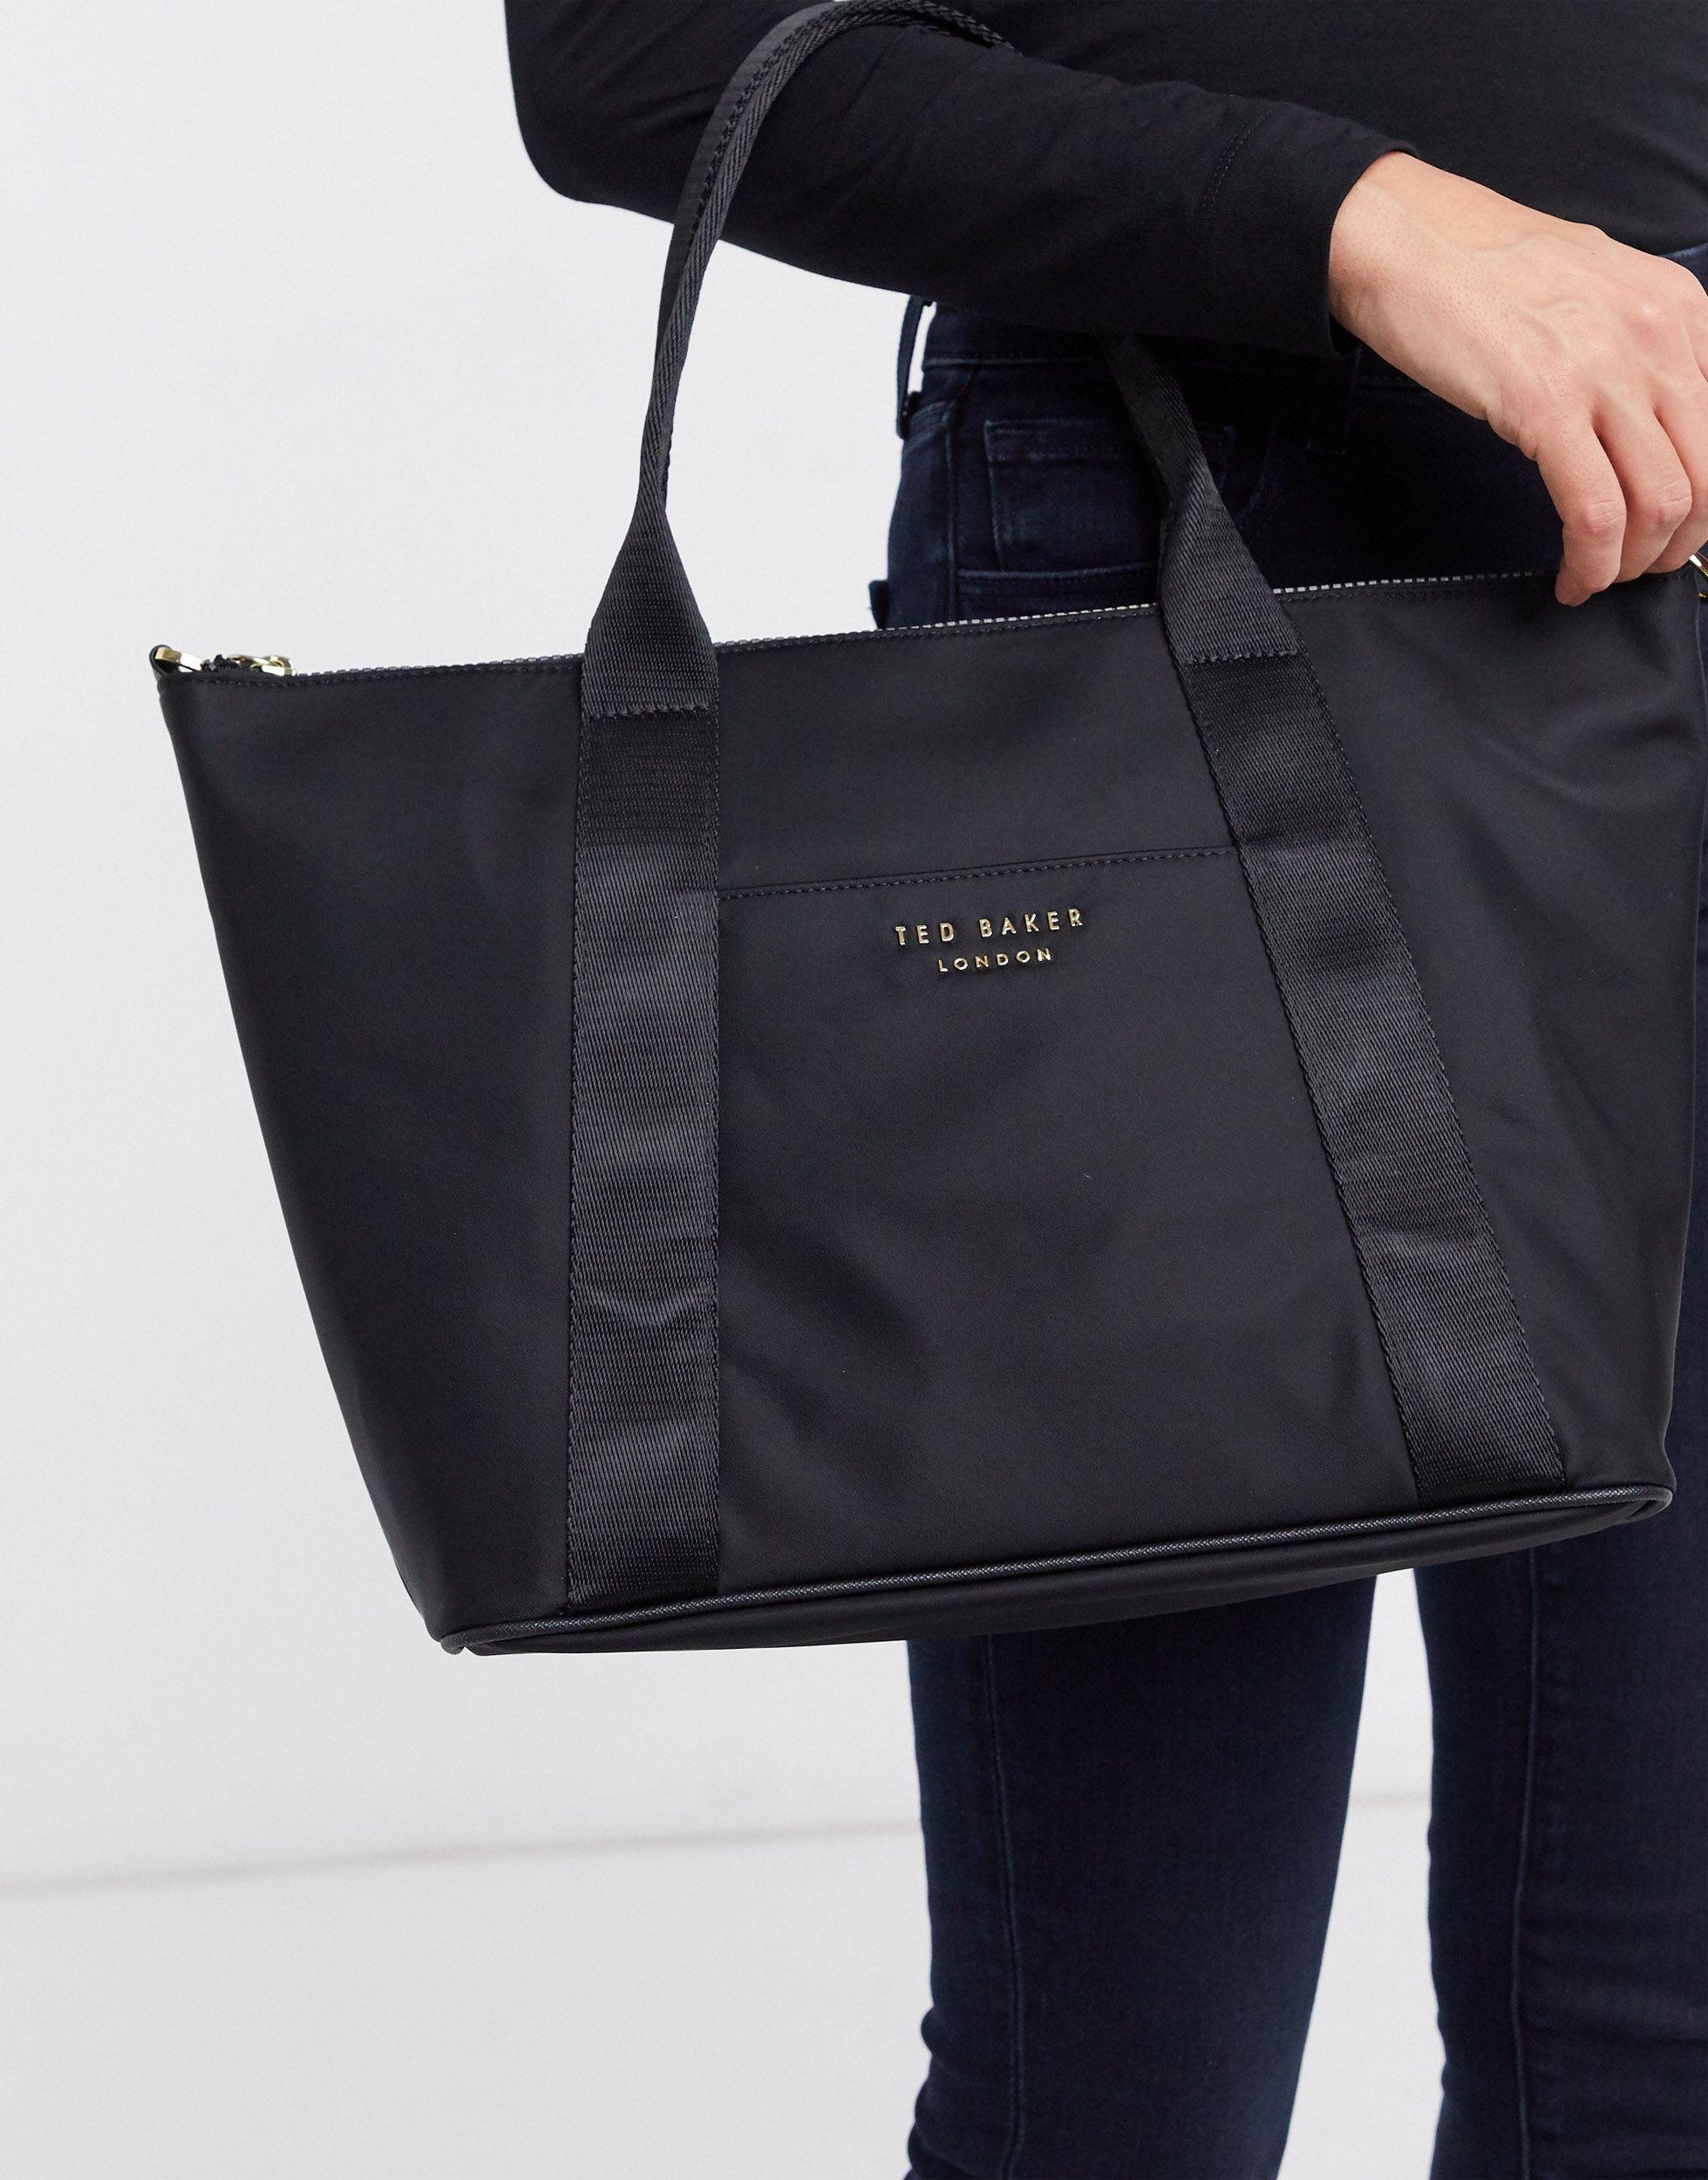 Ted Baker Nylon Small Tote in Black | Lyst UK